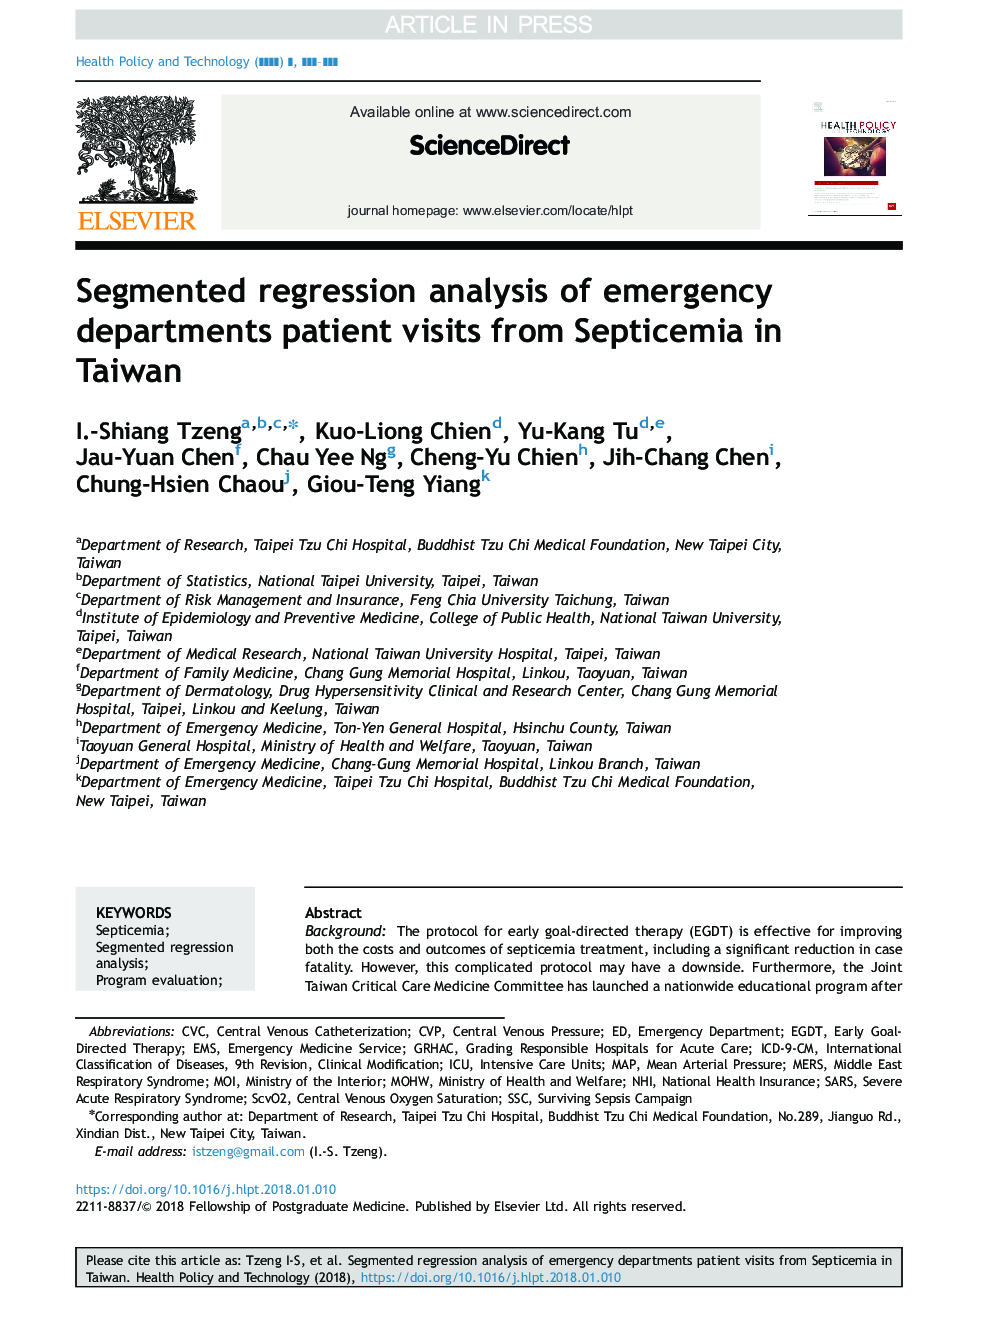 Segmented regression analysis of emergency departments patient visits from Septicemia in Taiwan